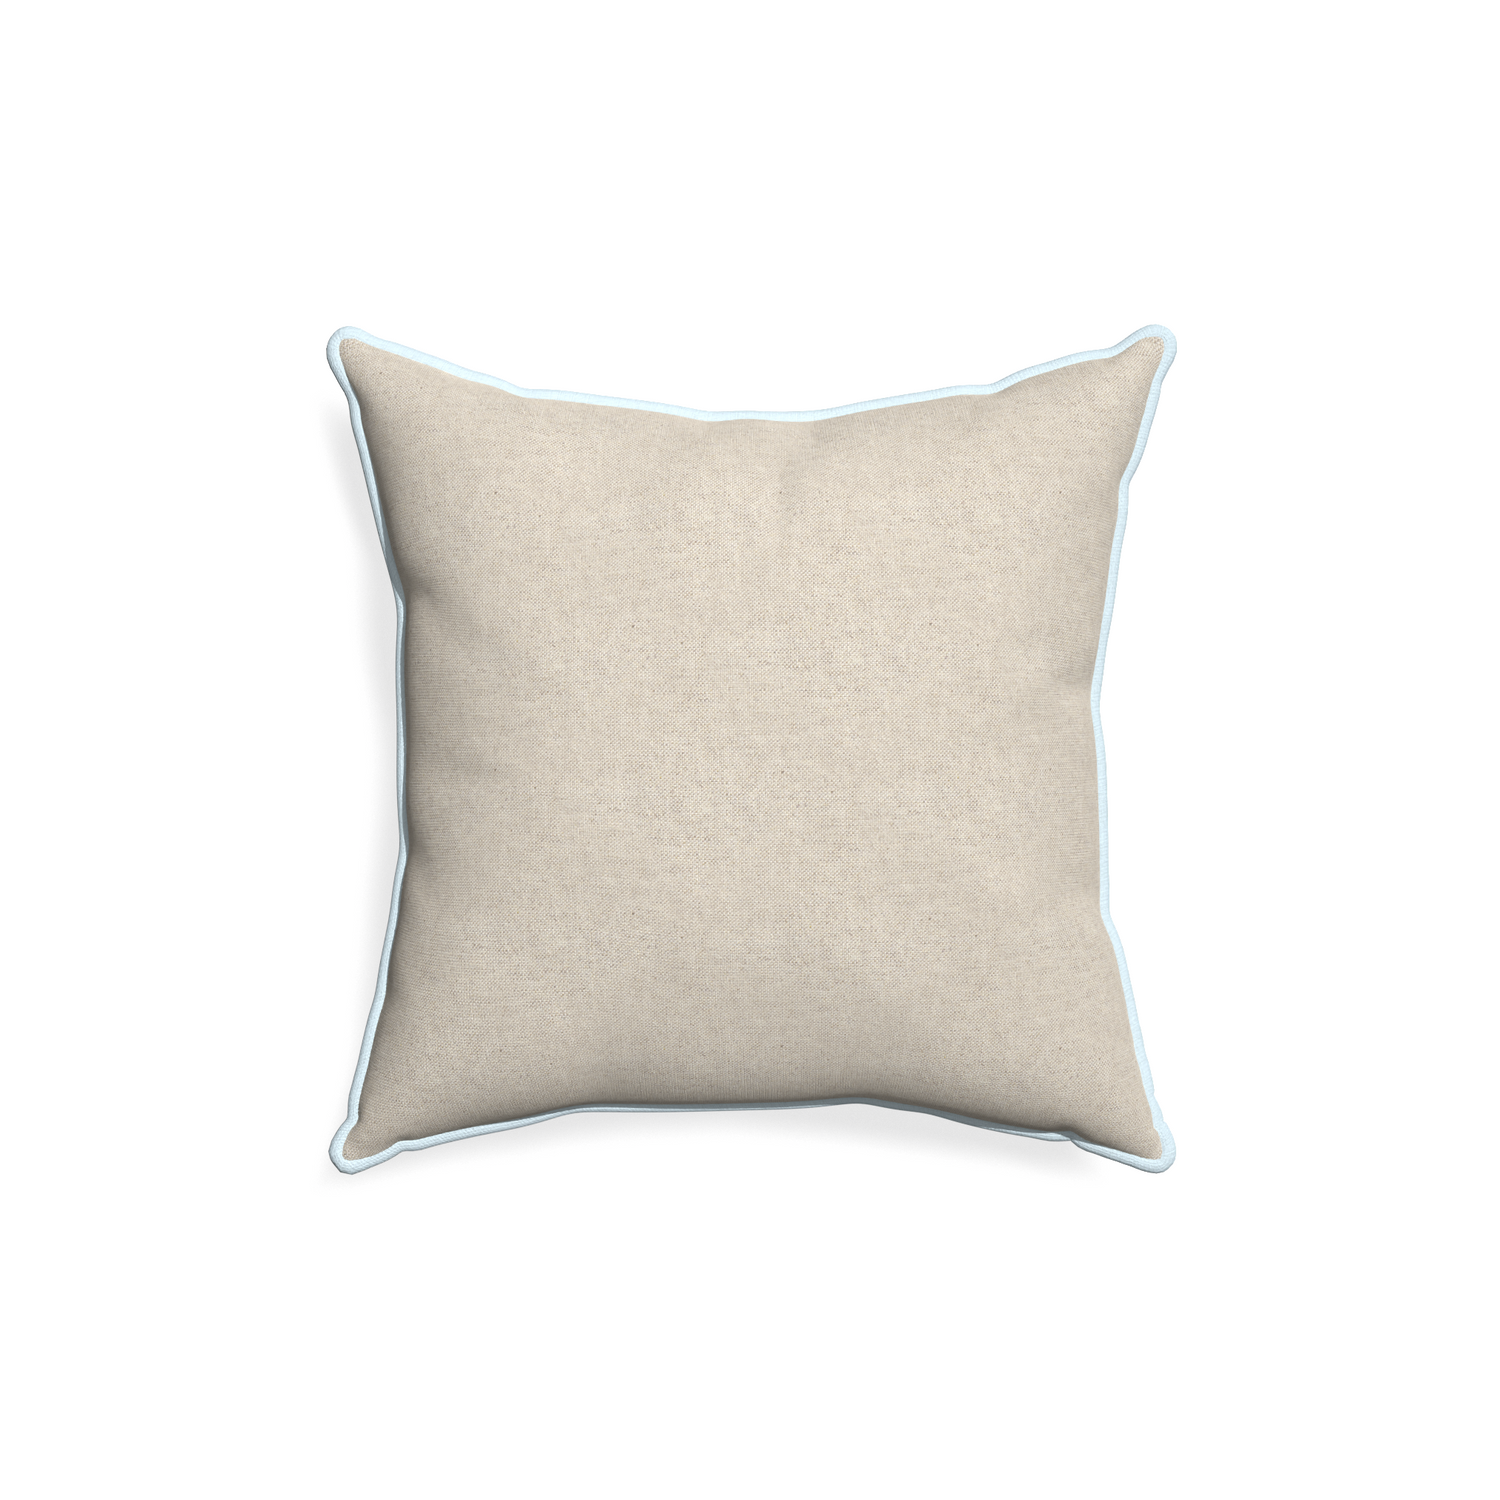 18-square oat custom light brownpillow with powder piping on white background